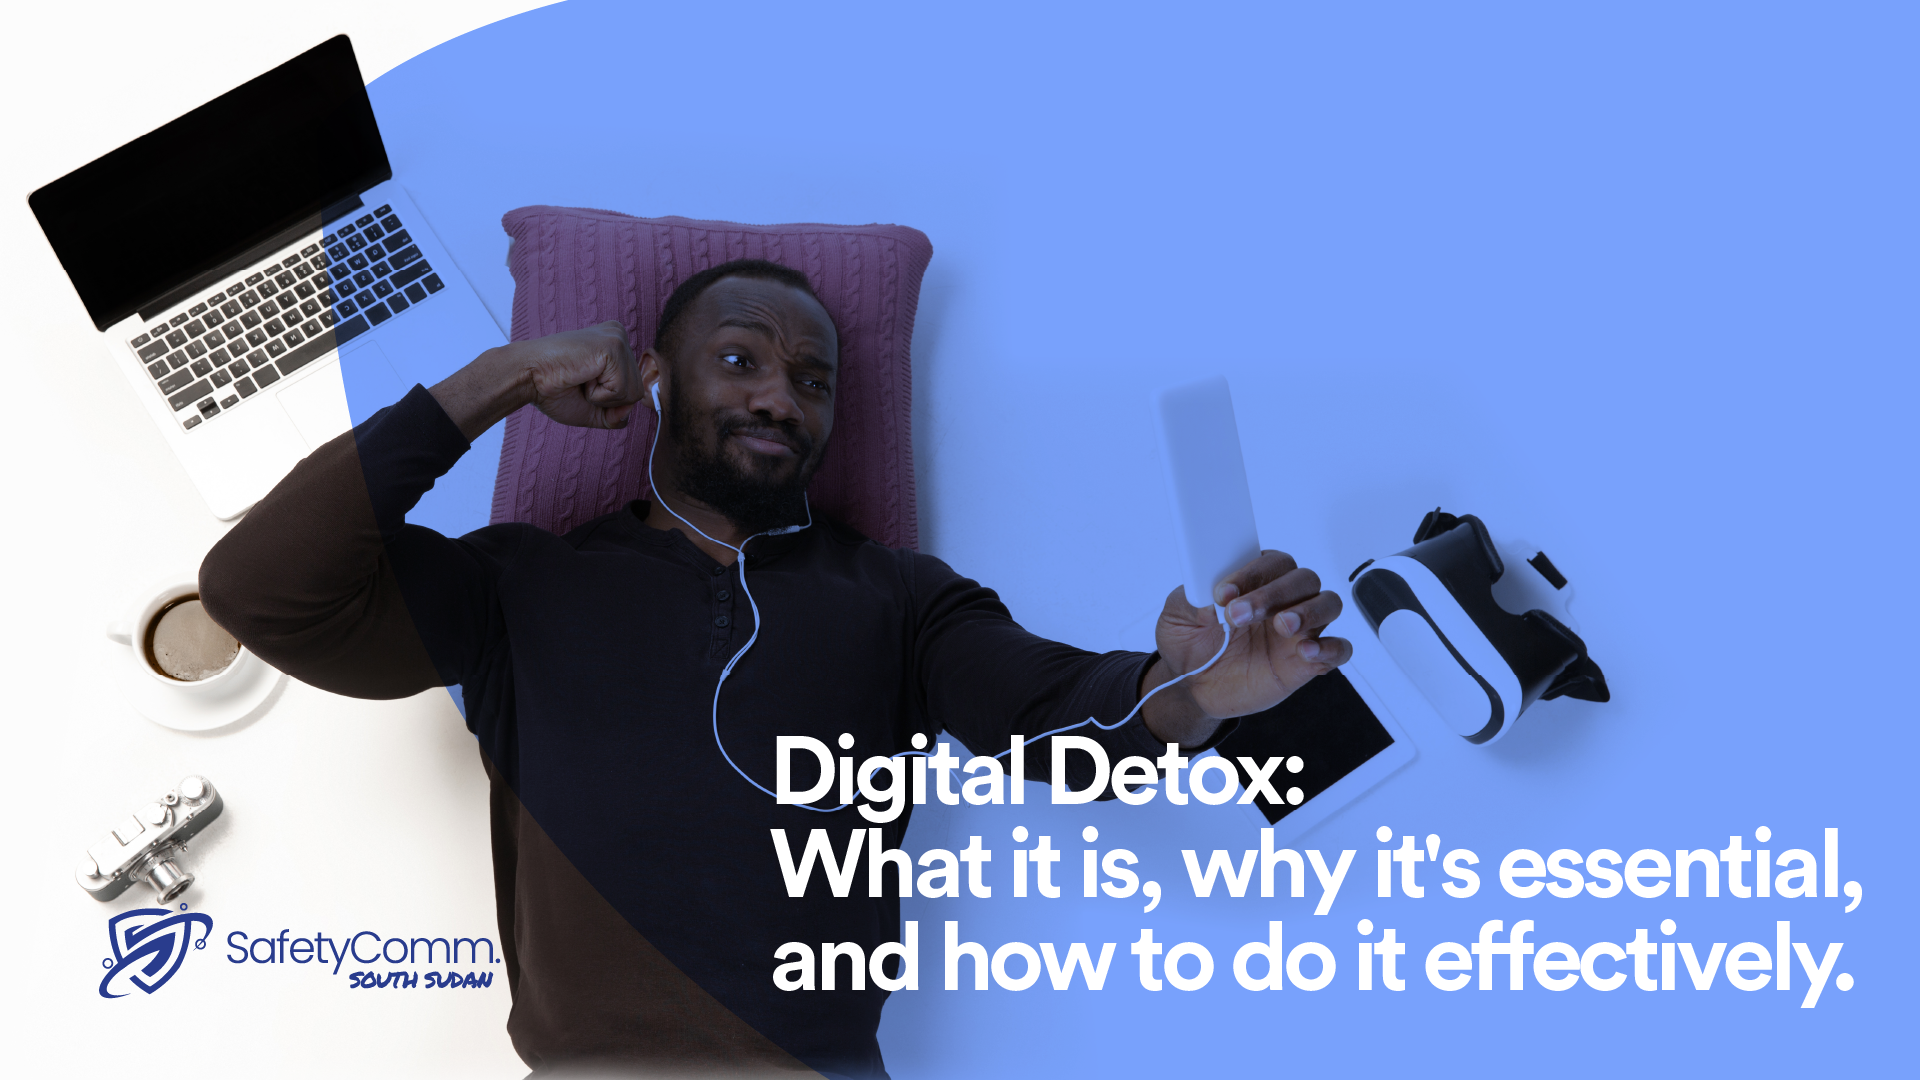 You are currently viewing Digital Detox: What it is, why it’s essential, and how to do it effectively